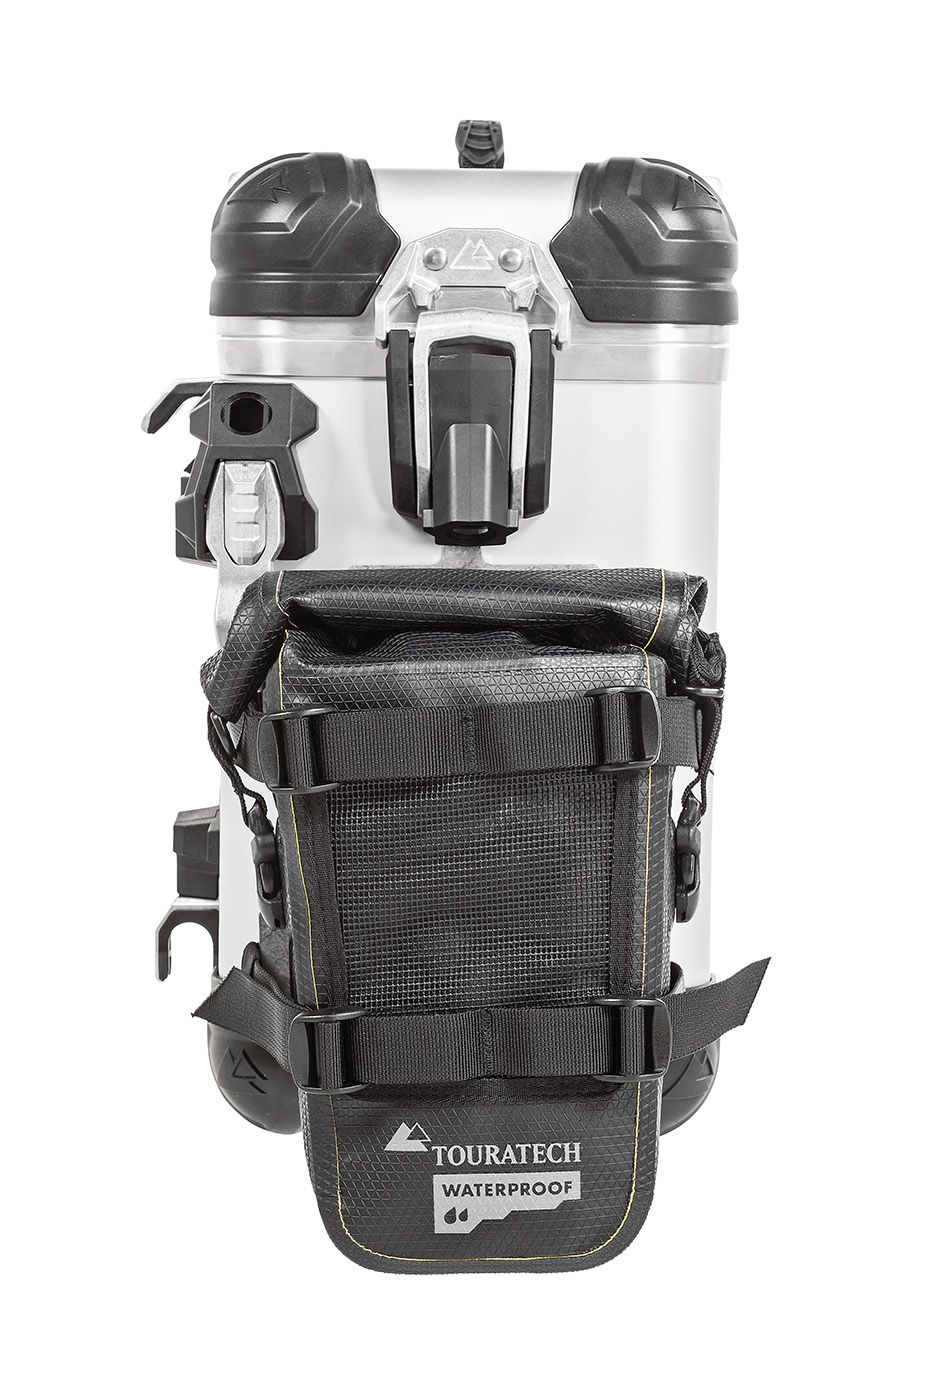 ZEGA Evo accessory holder set with additional bag+ EXTREME Edition by  Touratech Waterproof